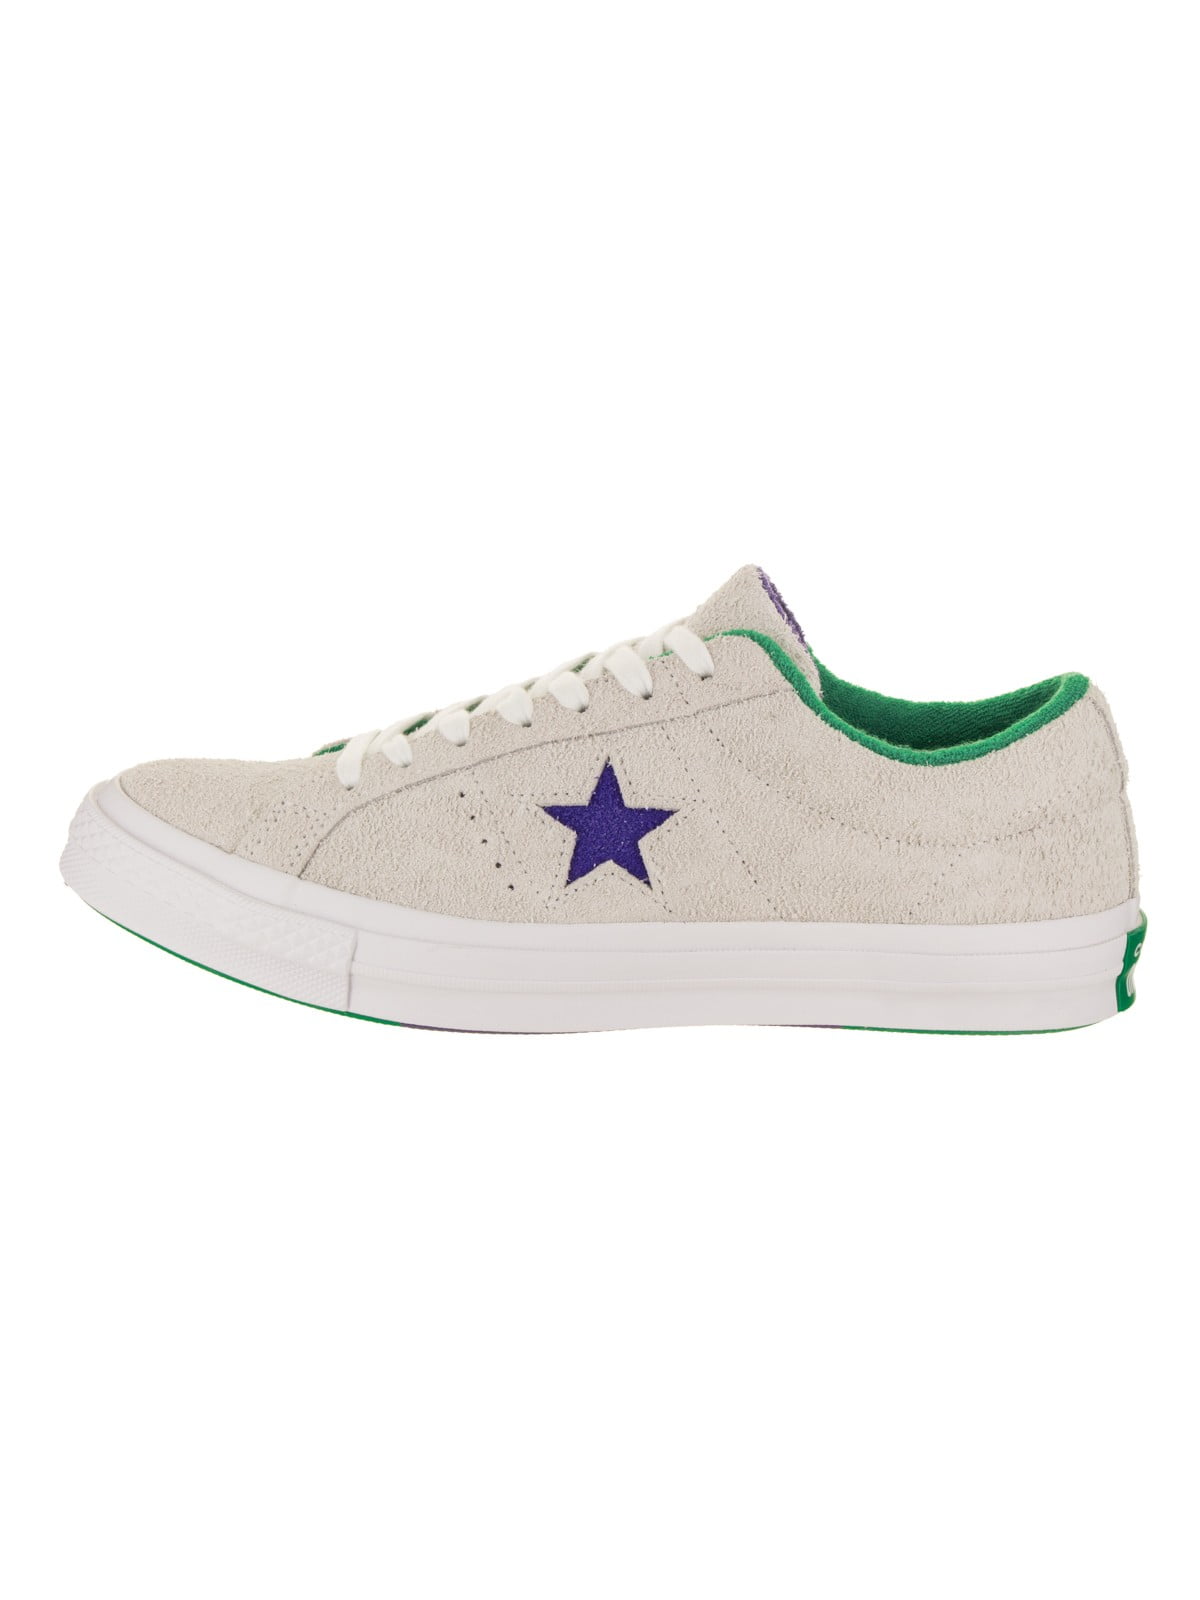 converse unisex one star ox casual shoe